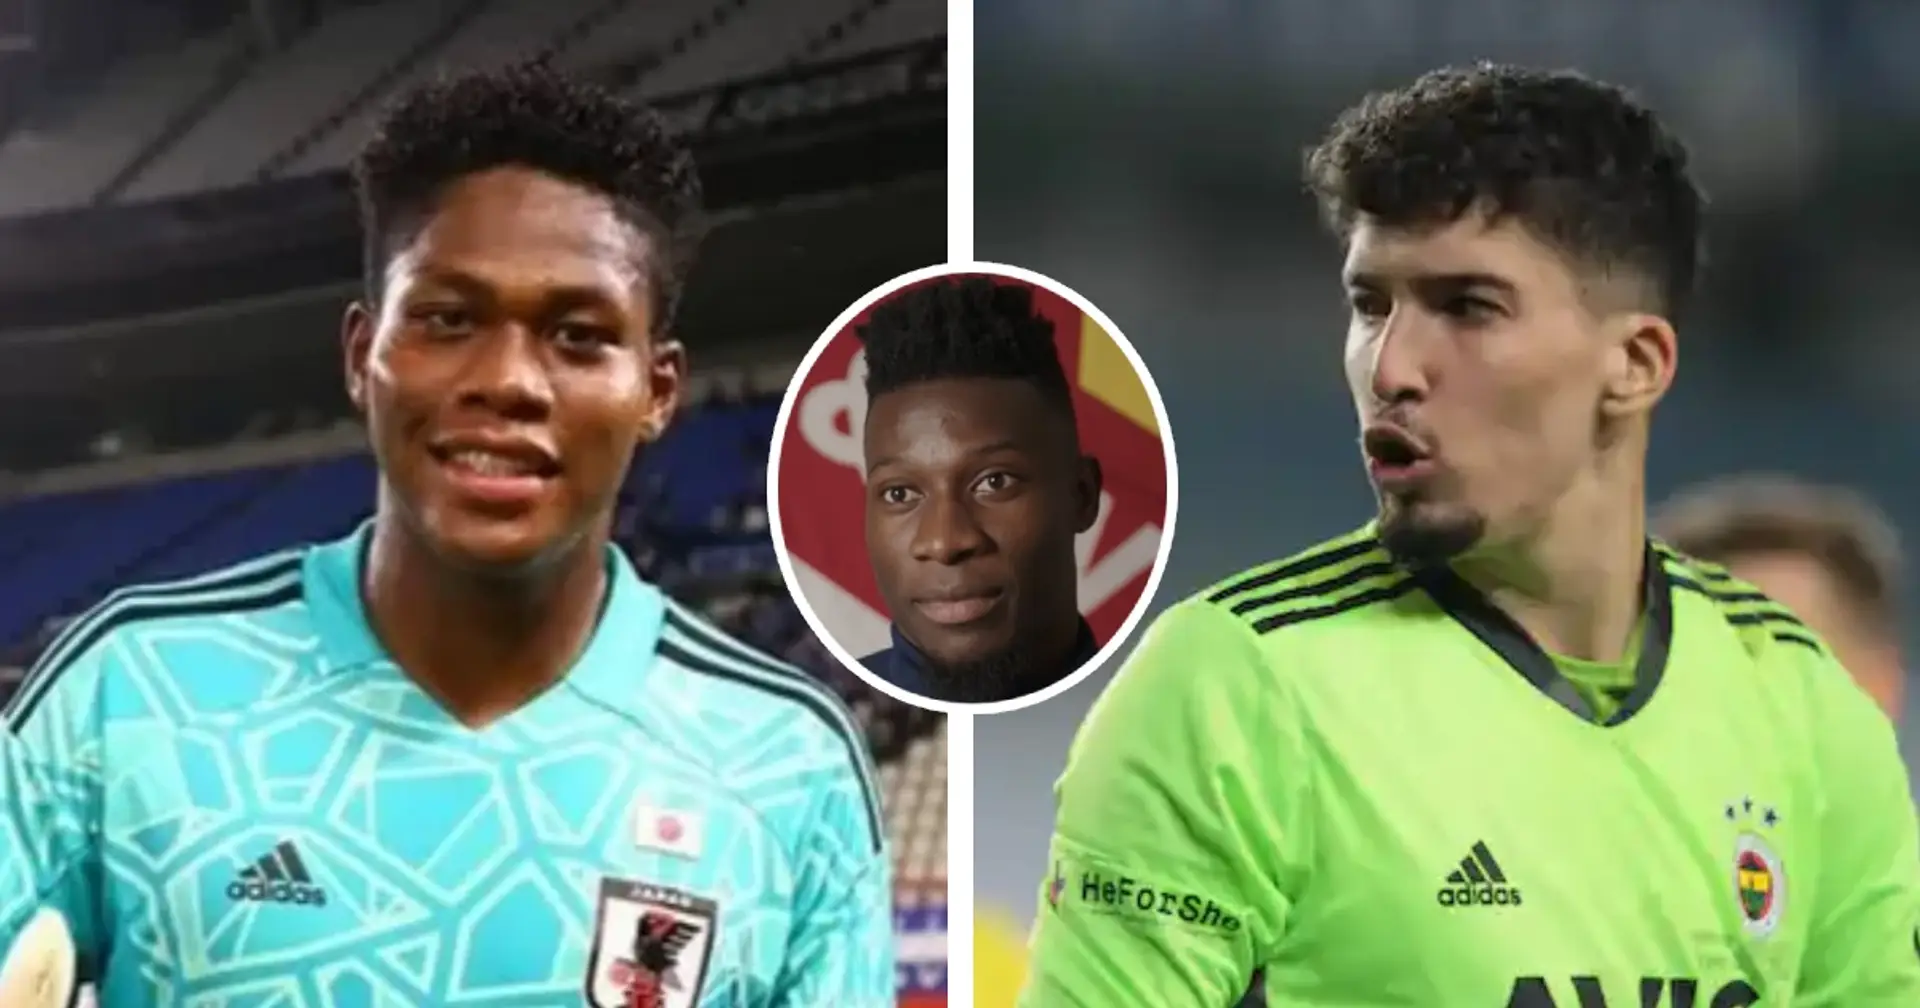 Man United identify two goalkeepers as Andre Onana's backup - their stats are impressive 